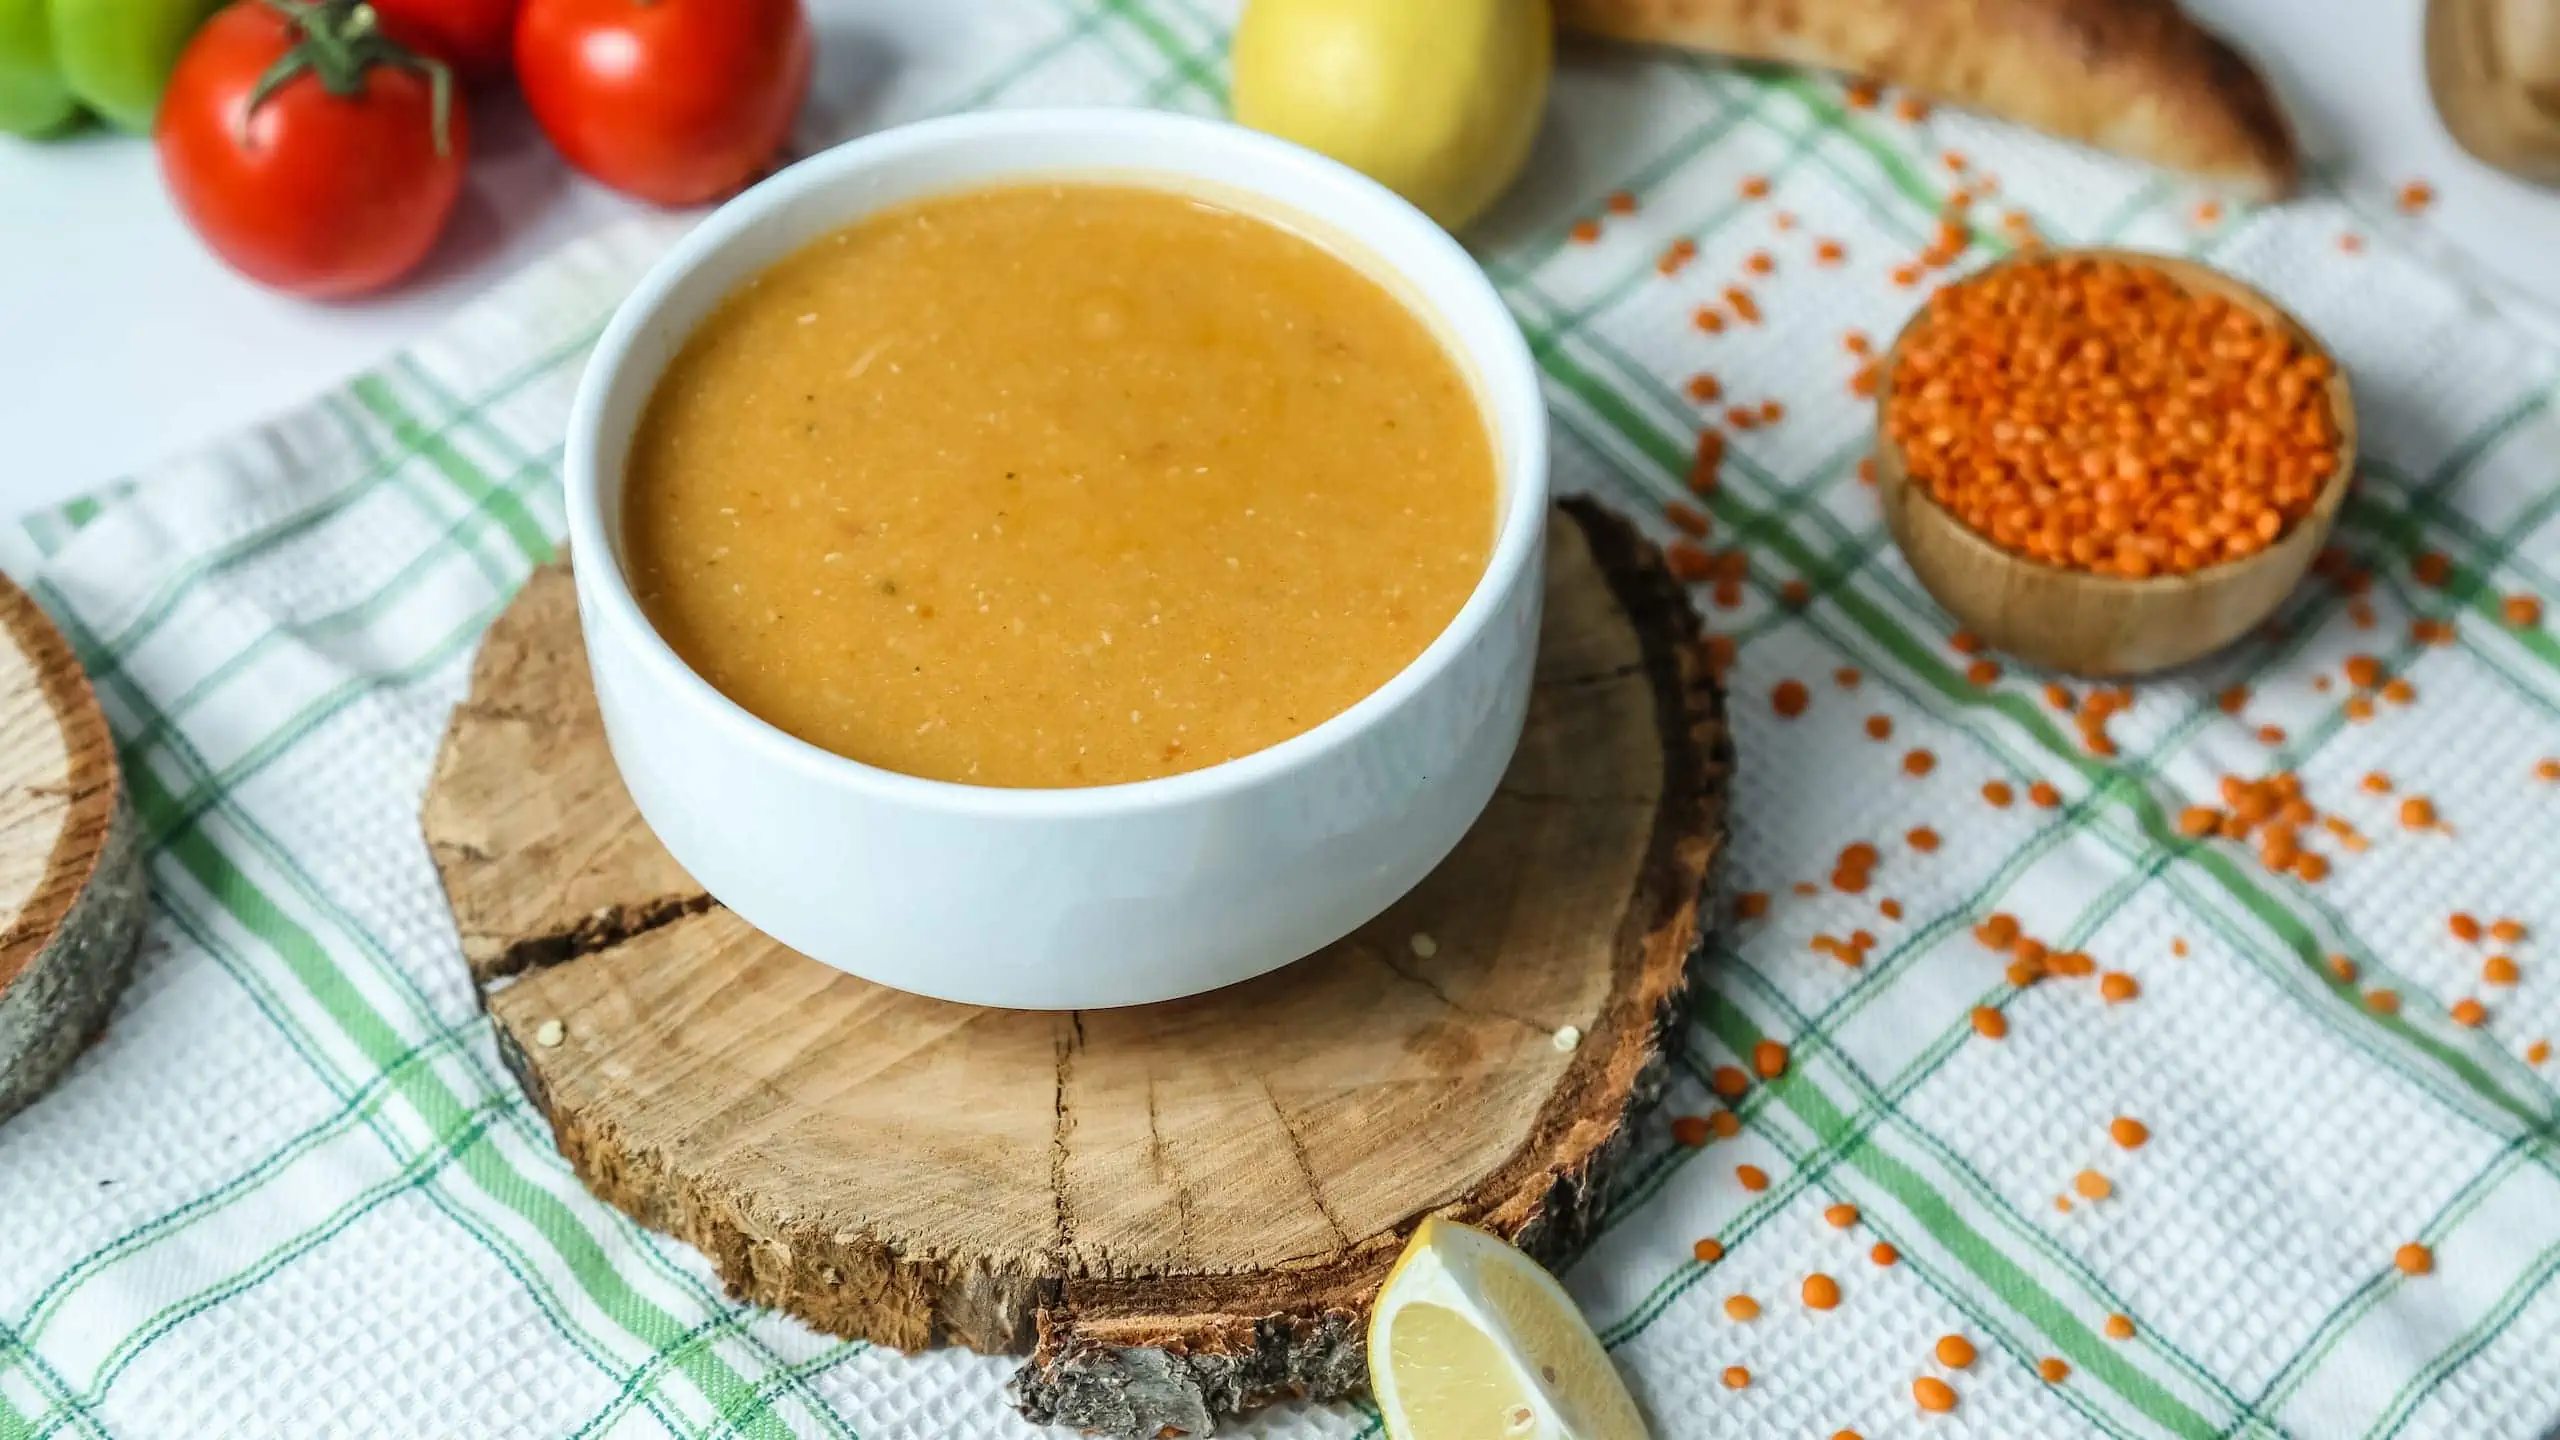 Our authentic homemade zip sauce recipe